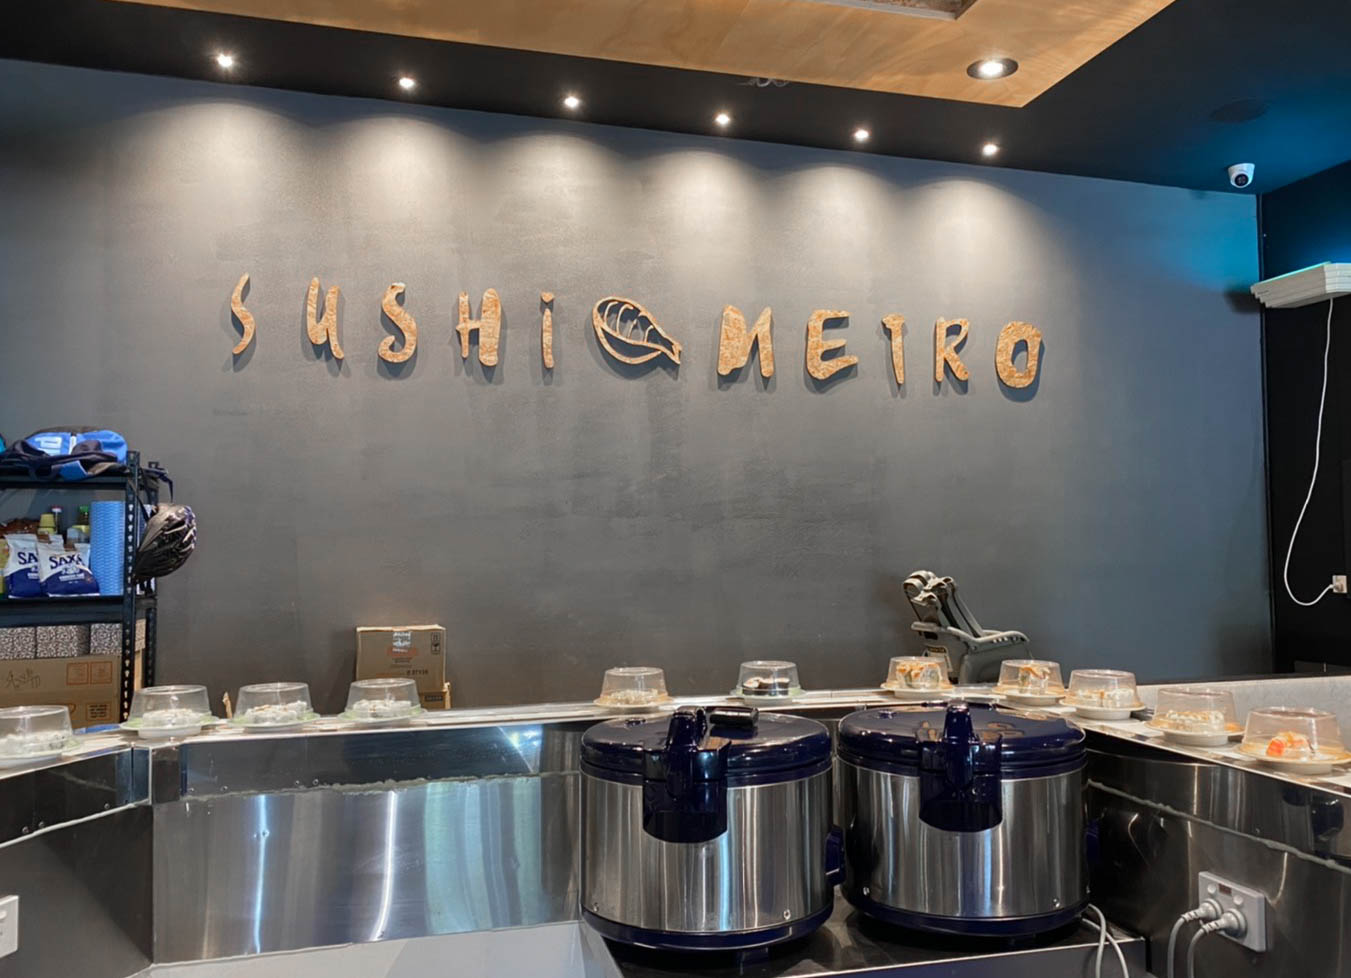 Read more about the article 澳洲打工度假｜餐飲業工作經驗－迴轉壽司店Sushi Metro